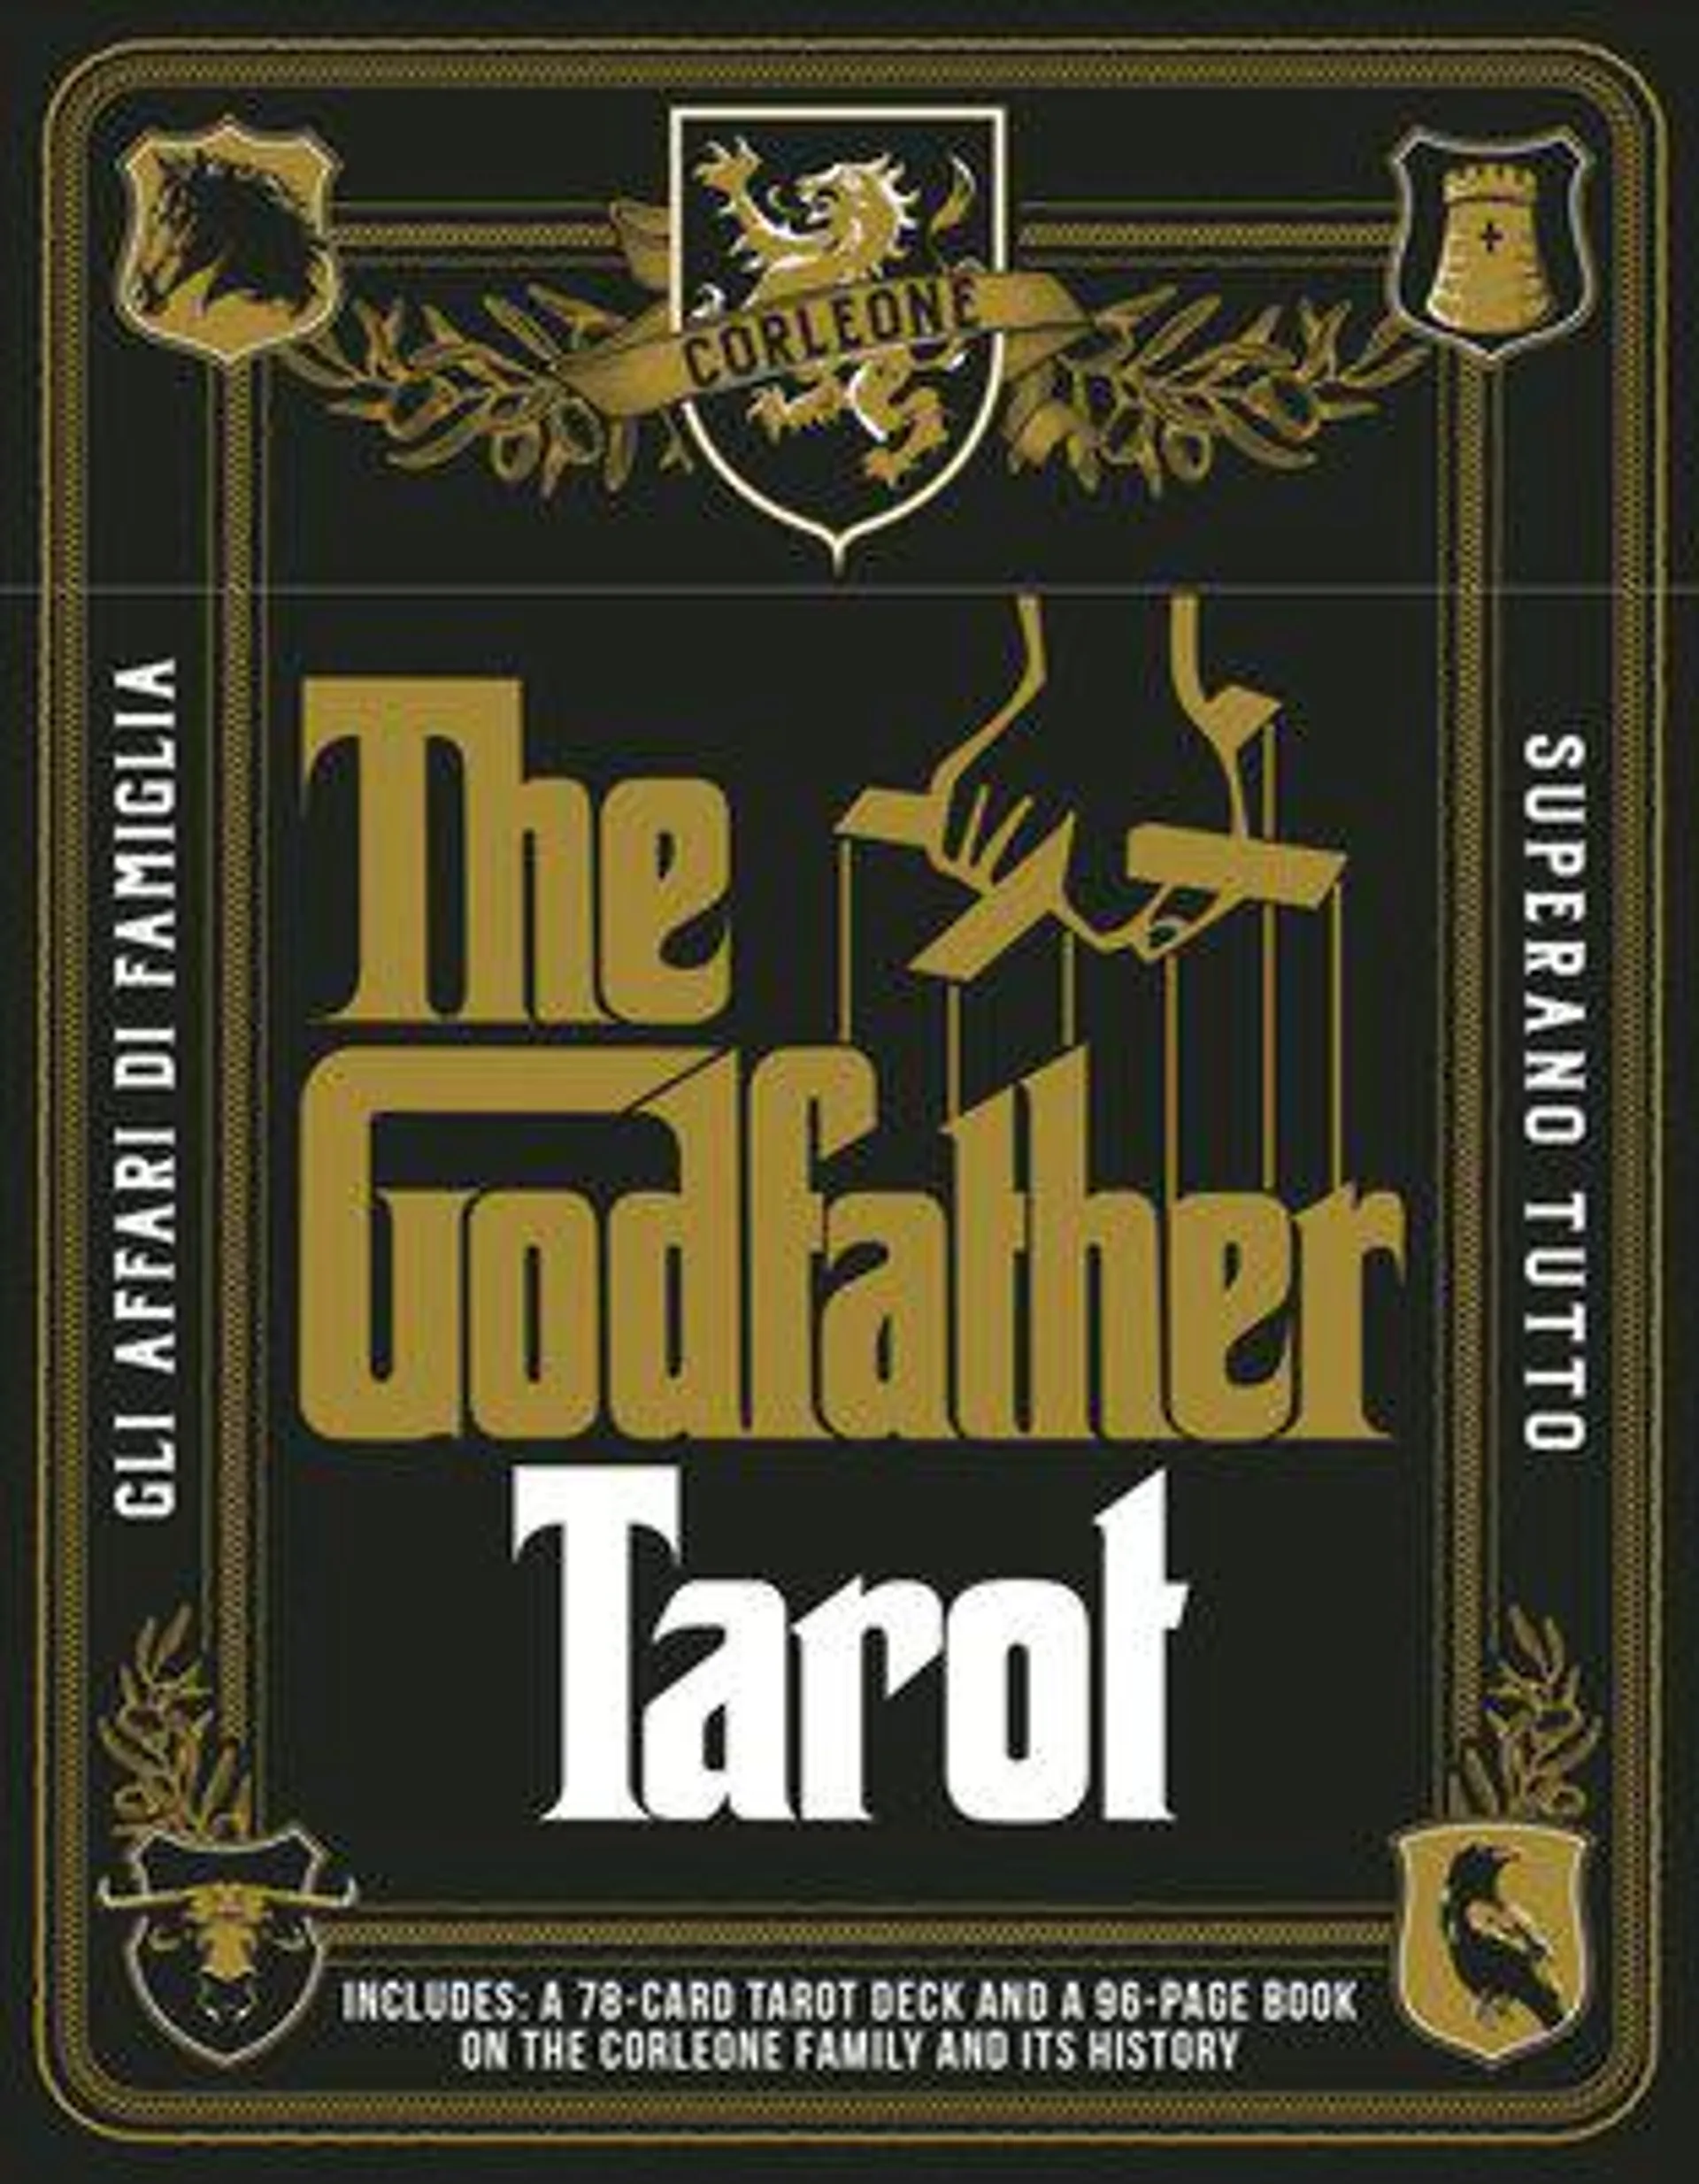 : Includes: A 78-card Tarot Deck and a Book on the Corleone Family and its History